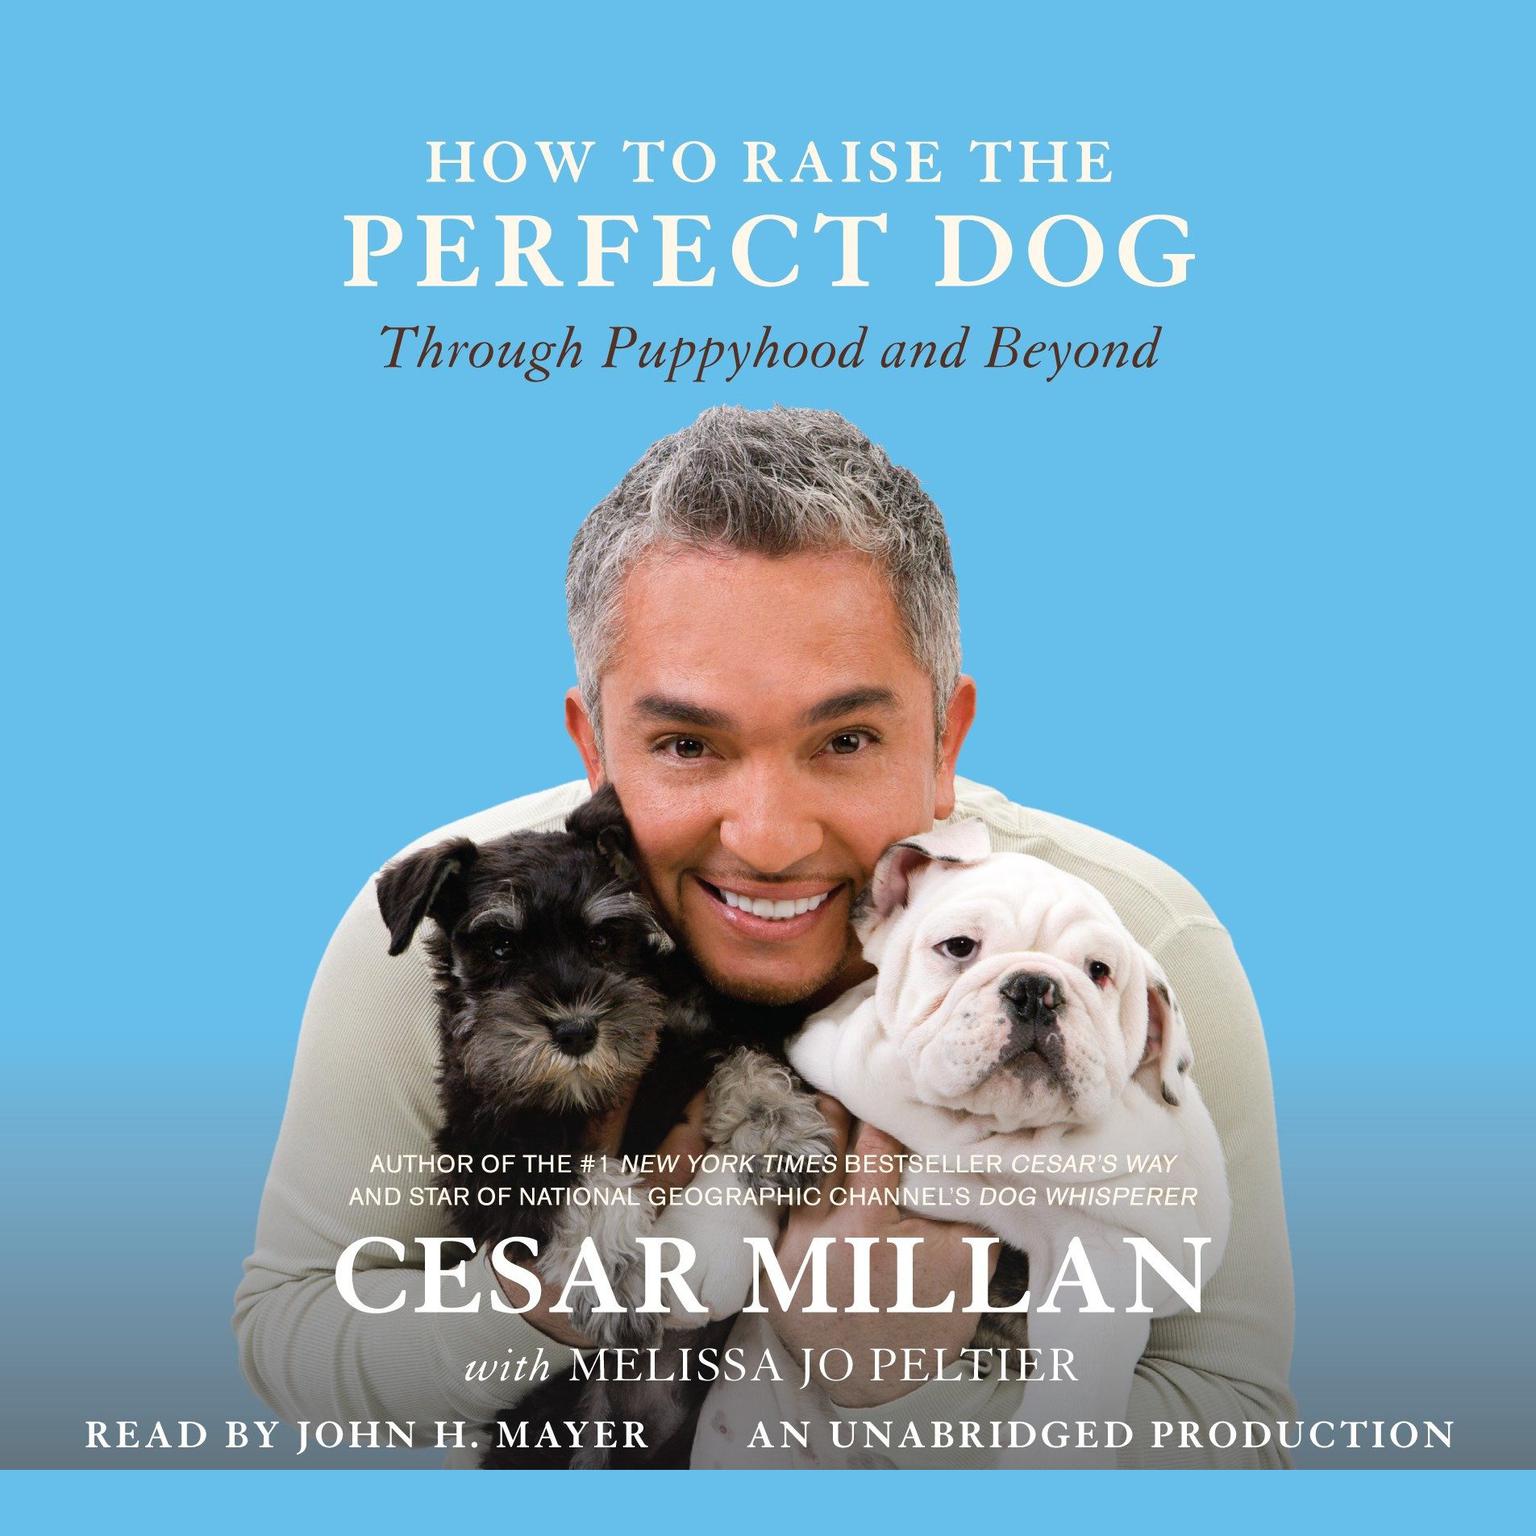 How to Raise the Perfect Dog: Through Puppyhood and Beyond Audiobook, by Cesar Millan